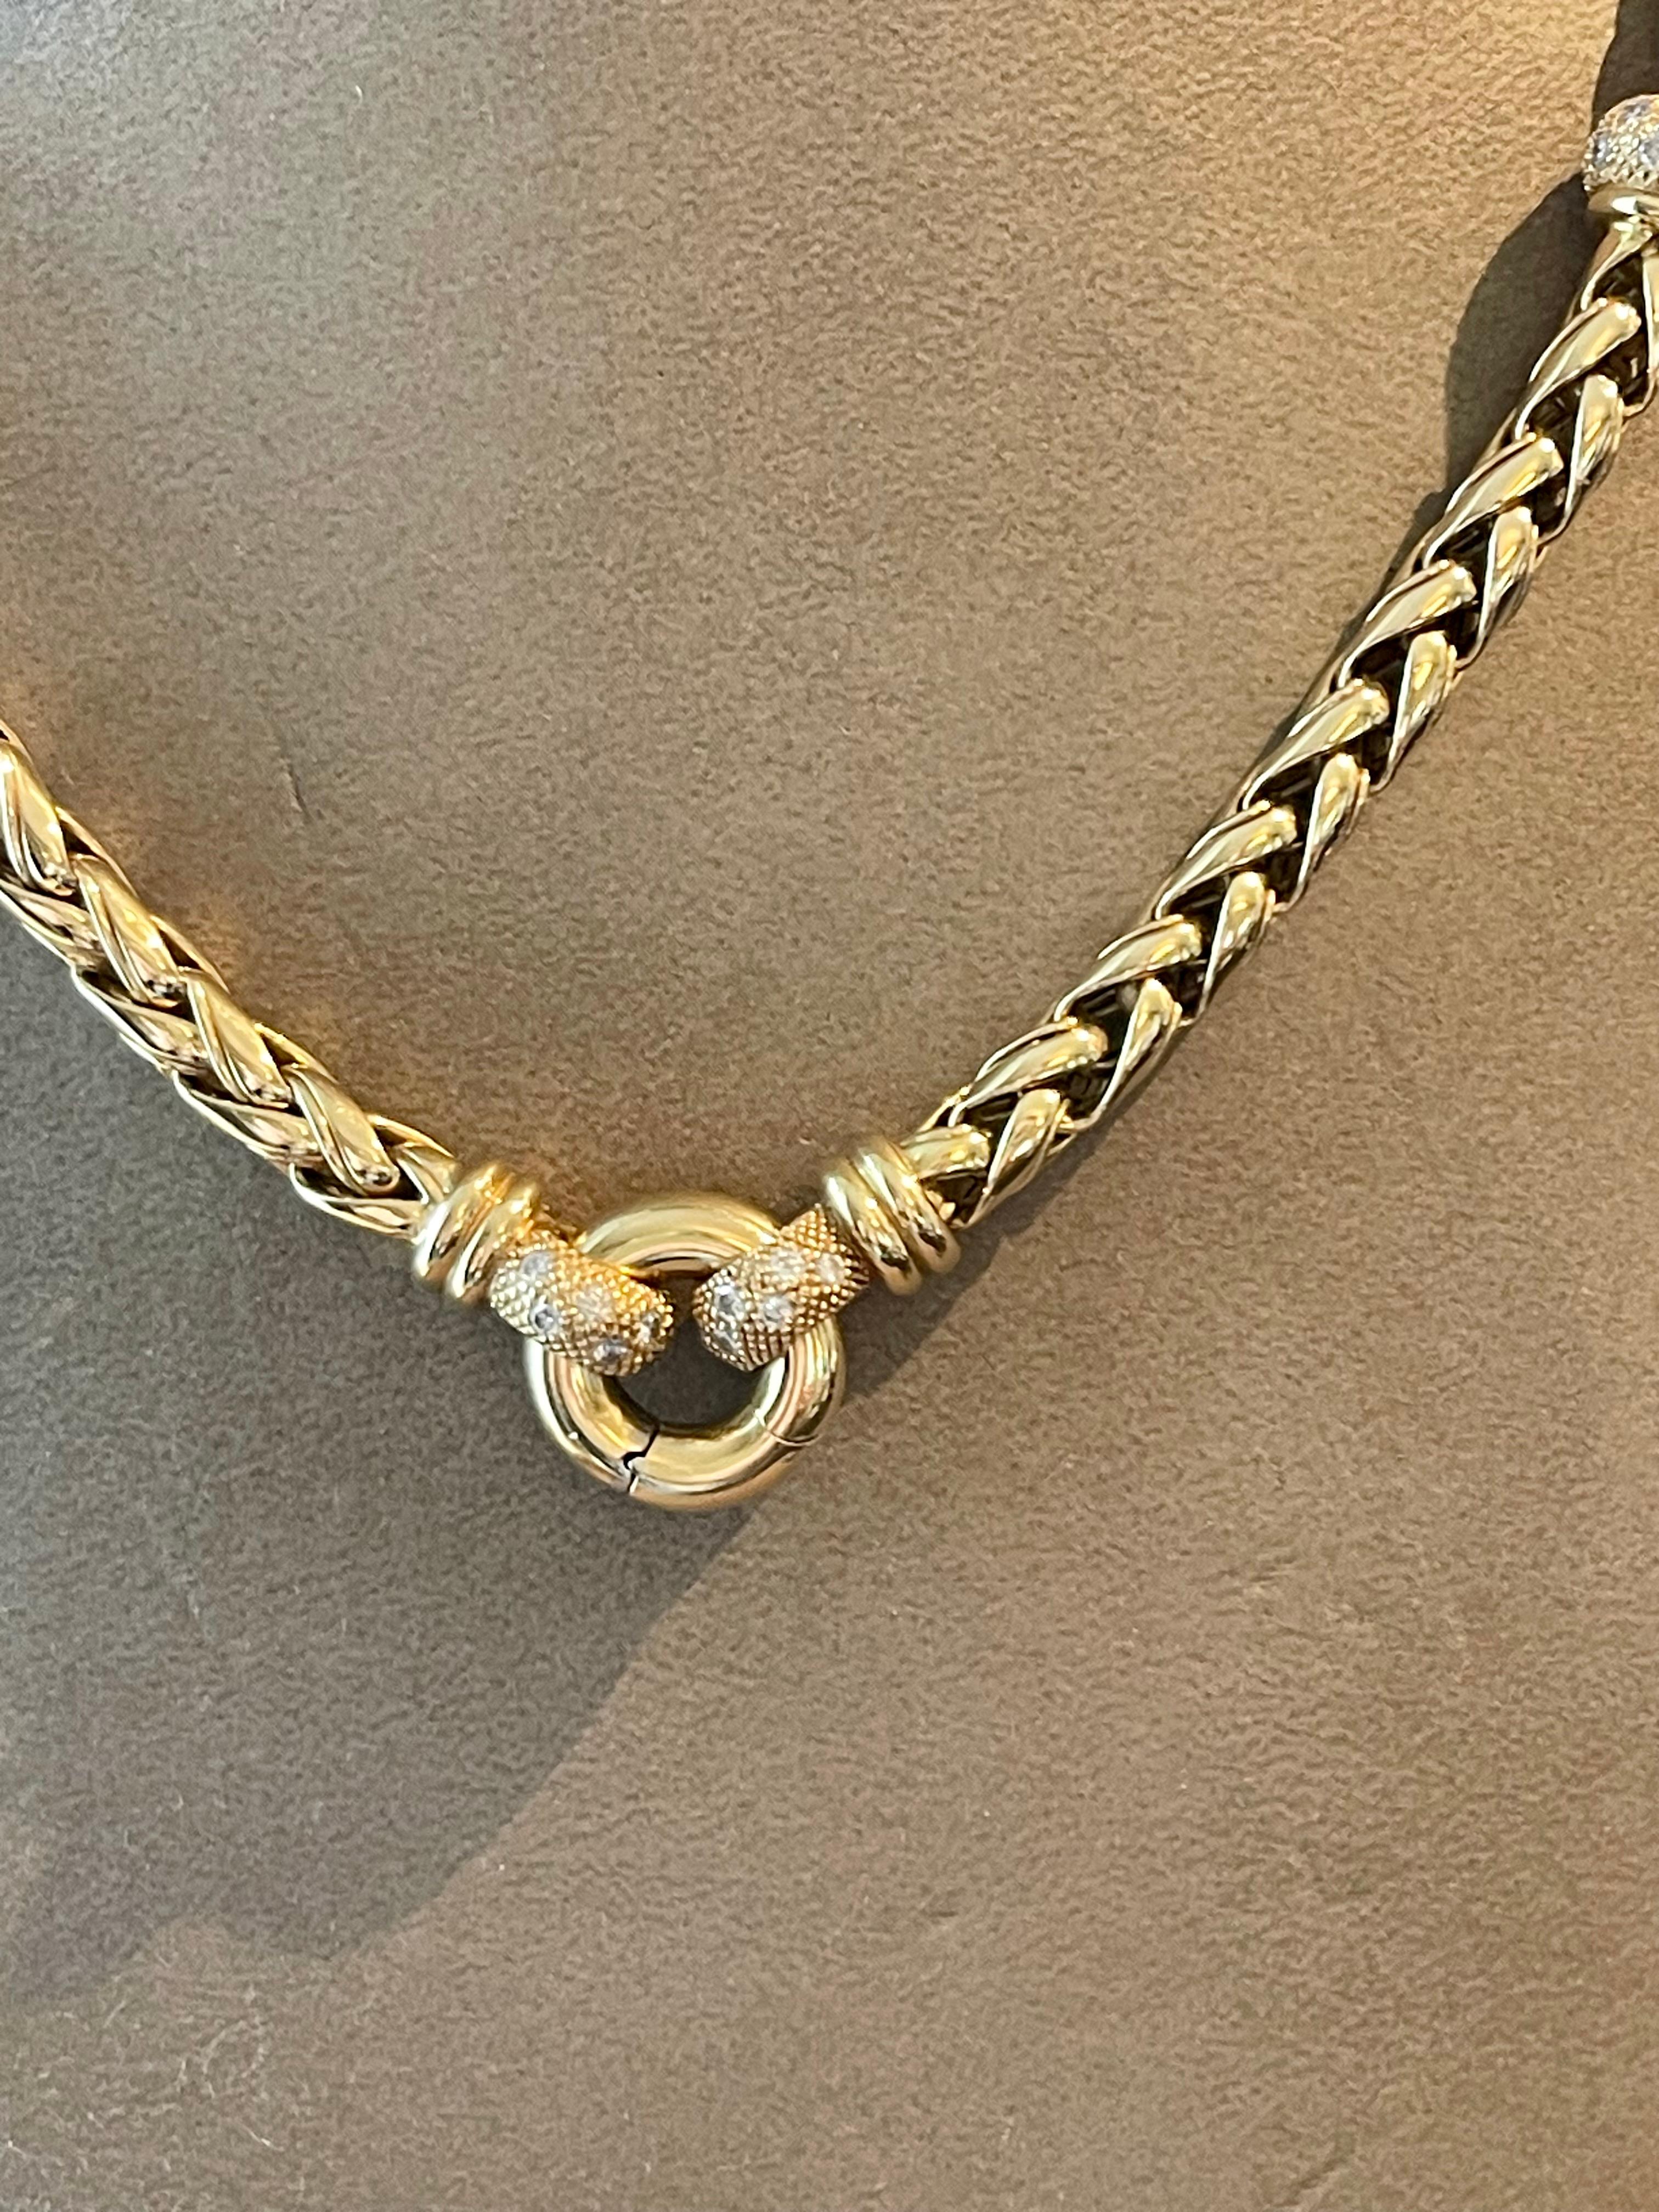 A timeless 18 K handcrafted yellow Gold fancy rope necklace set with small diamonds. Length 45 cm. Weight: 86.48 grams.
QUESTIONS?  Contact us right away if you have additional questions.  We are here to connect you with beautiful and affordable